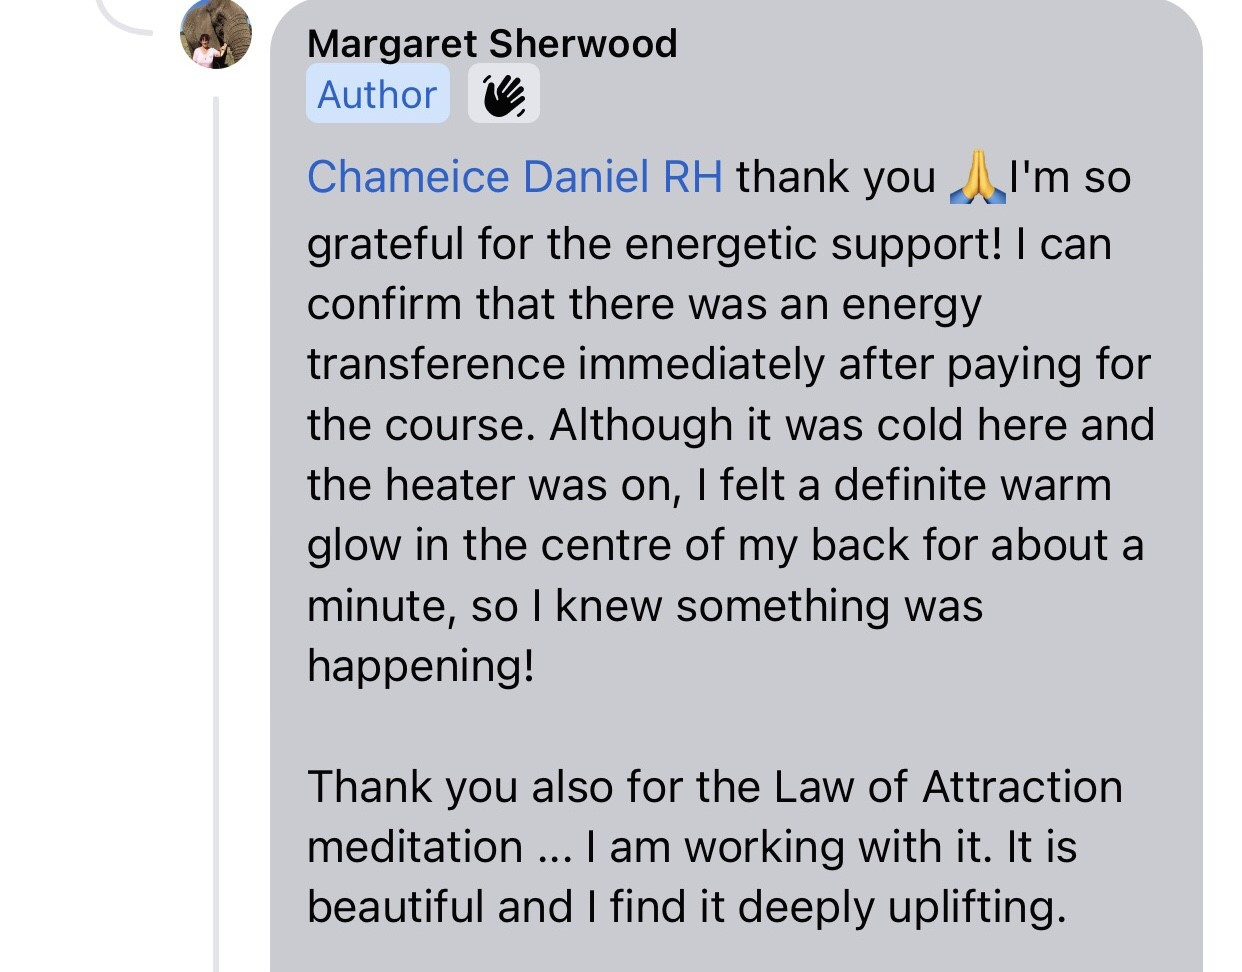 I'm so grateful for the energetic support! I can confirm that there was an energy transference immediately after paying for the course. 
Although it was cold here and the heater was on, I felt a definite warm glow in the centre of my back for about a minute, so I knew something was happening!
Thank you also for the Law of Attraction meditation… I am working with it. It is beautiful and I find it deeply uplifting.